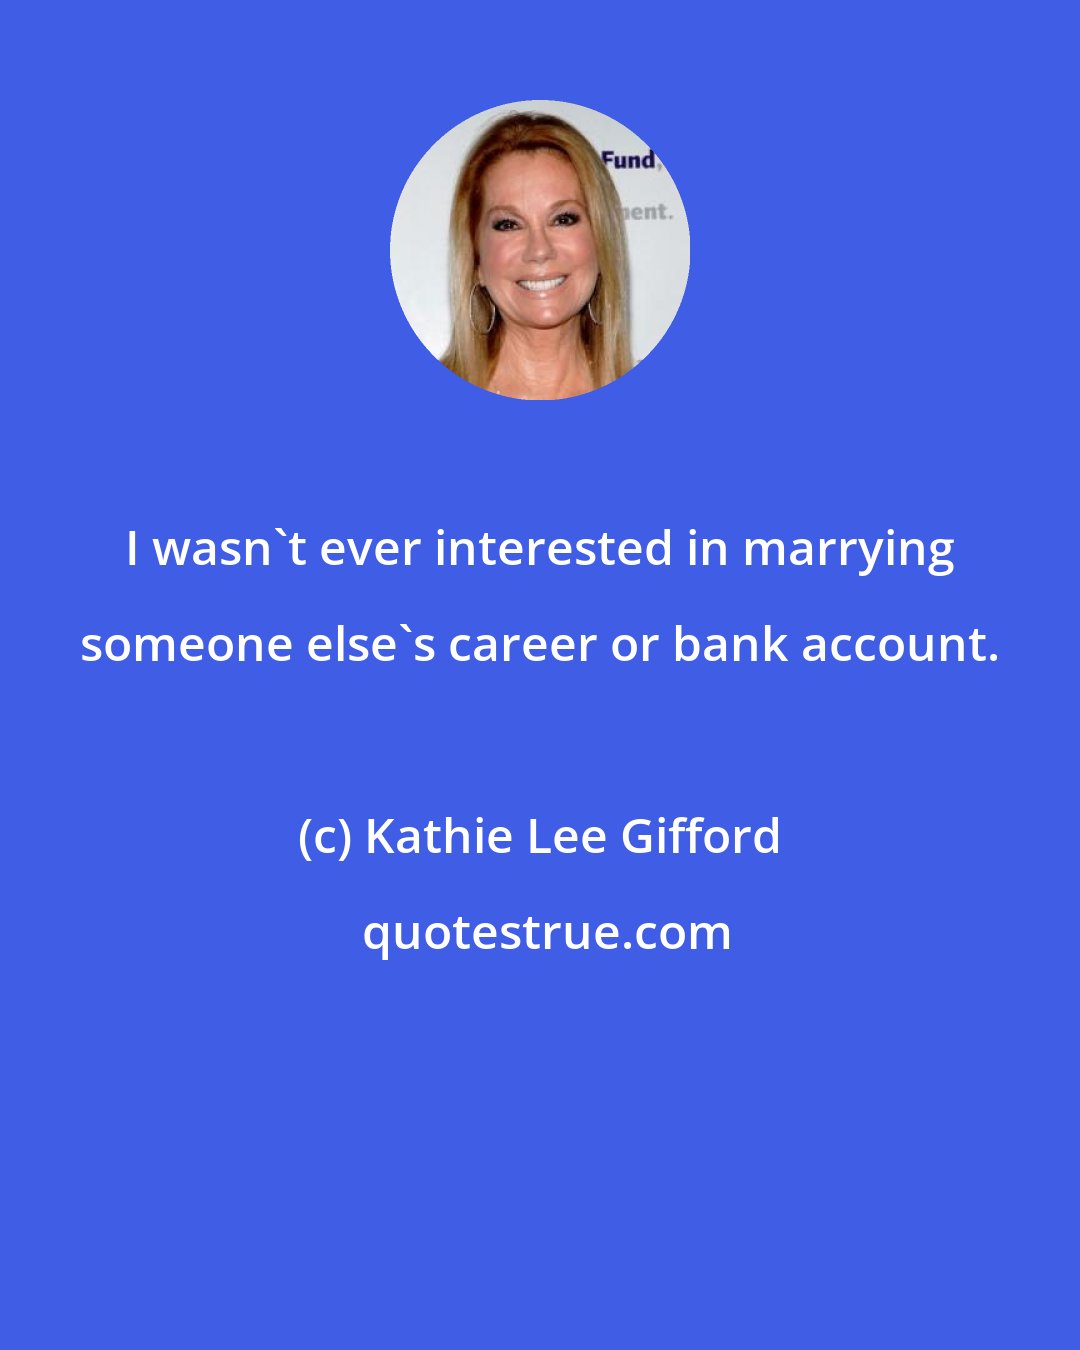 Kathie Lee Gifford: I wasn't ever interested in marrying someone else's career or bank account.